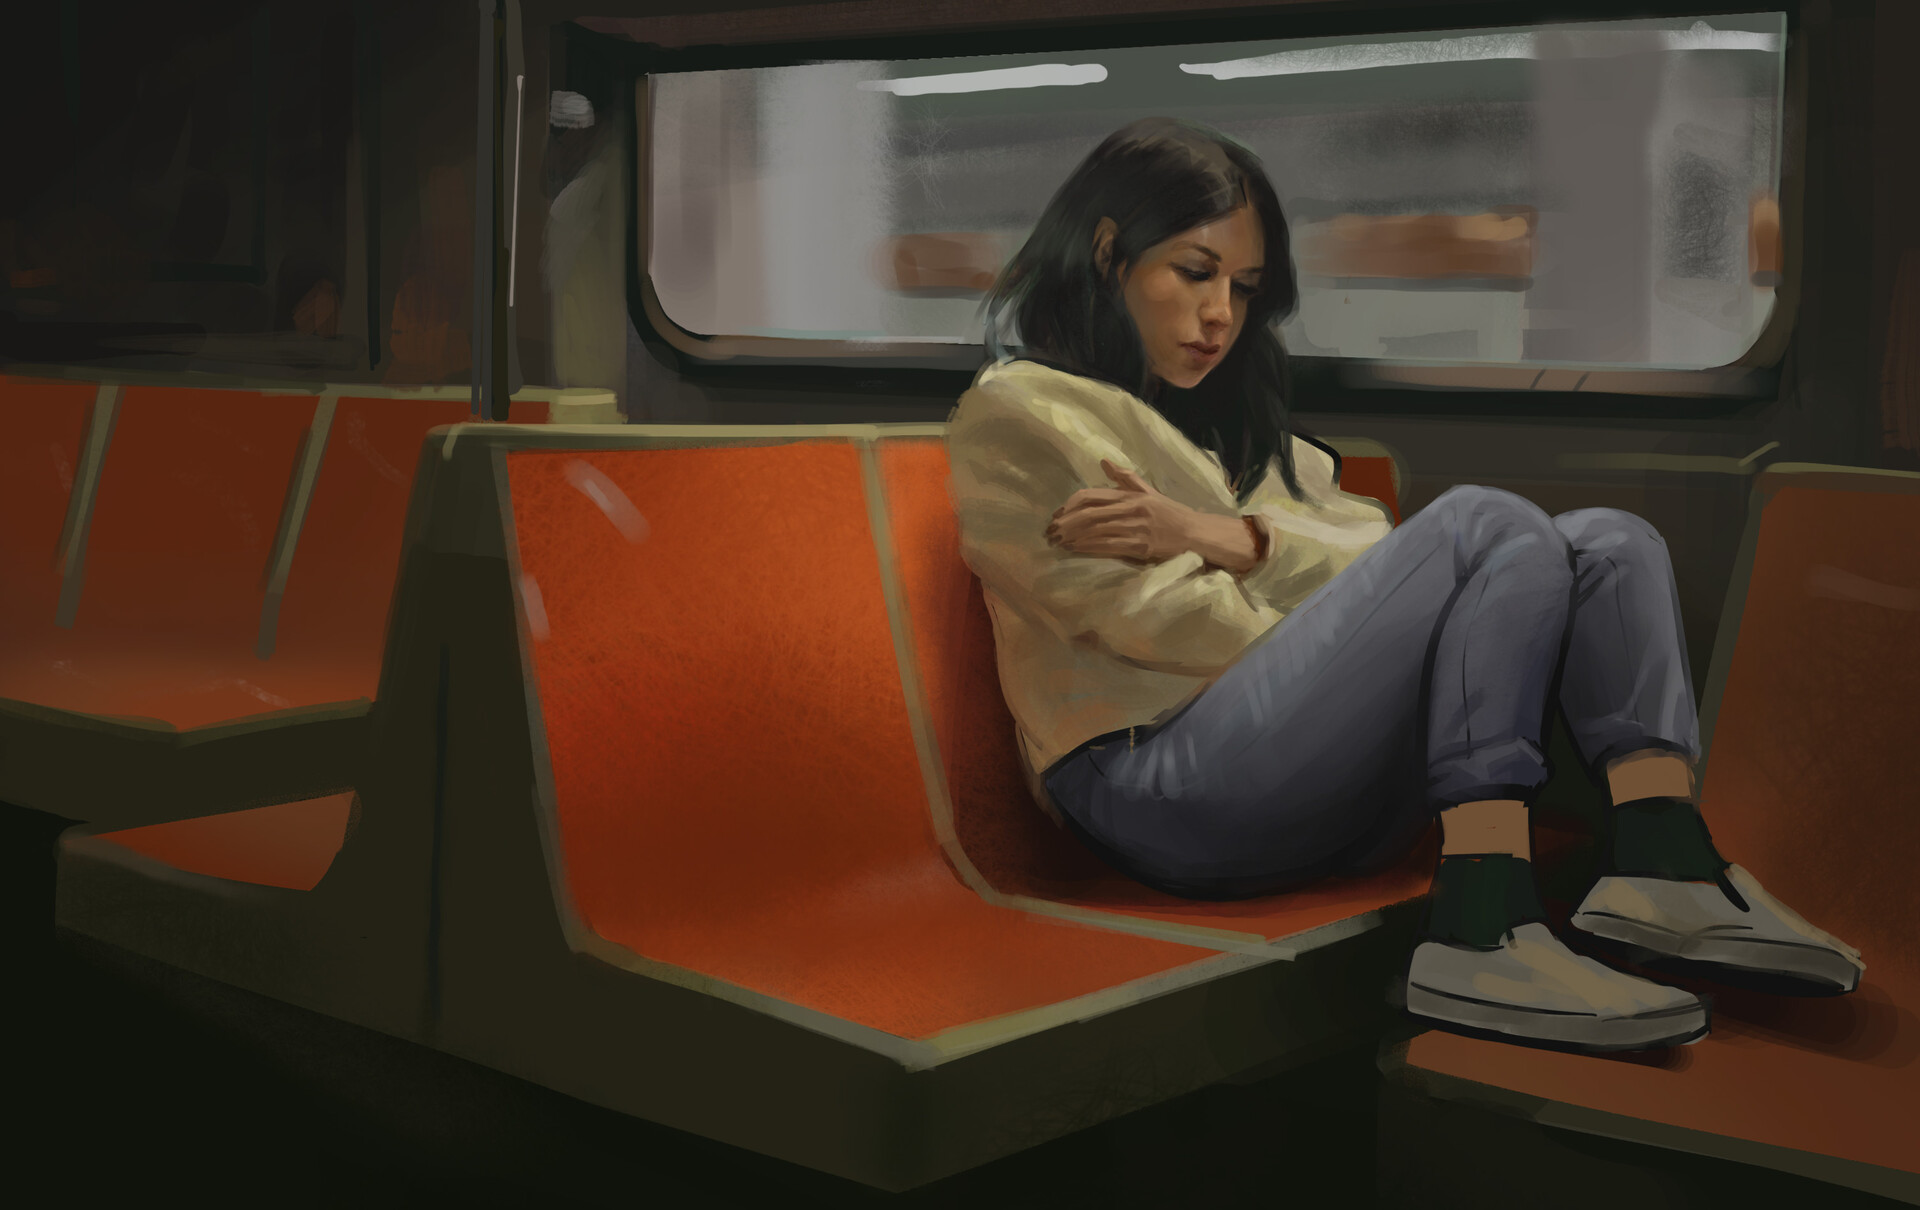 A fun study to capture the mood in the colors. 